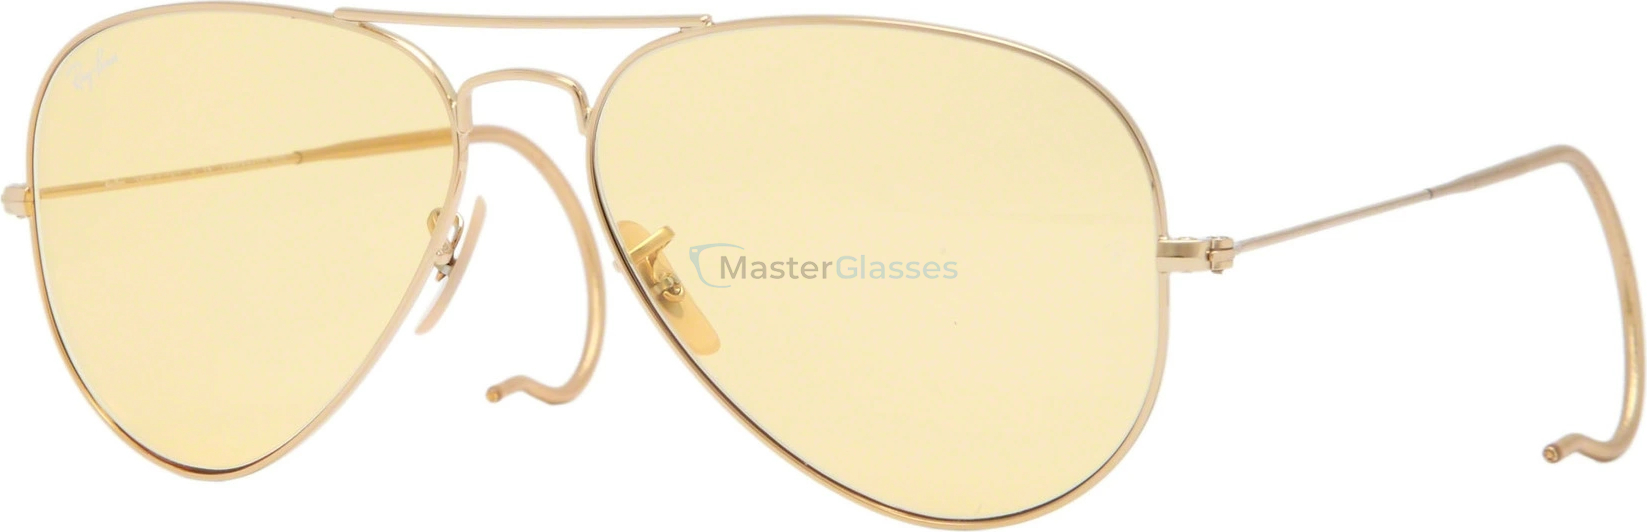   Ray-Ban Aviator Large Metal (m) RB3025M 001/4A Shiny Gold